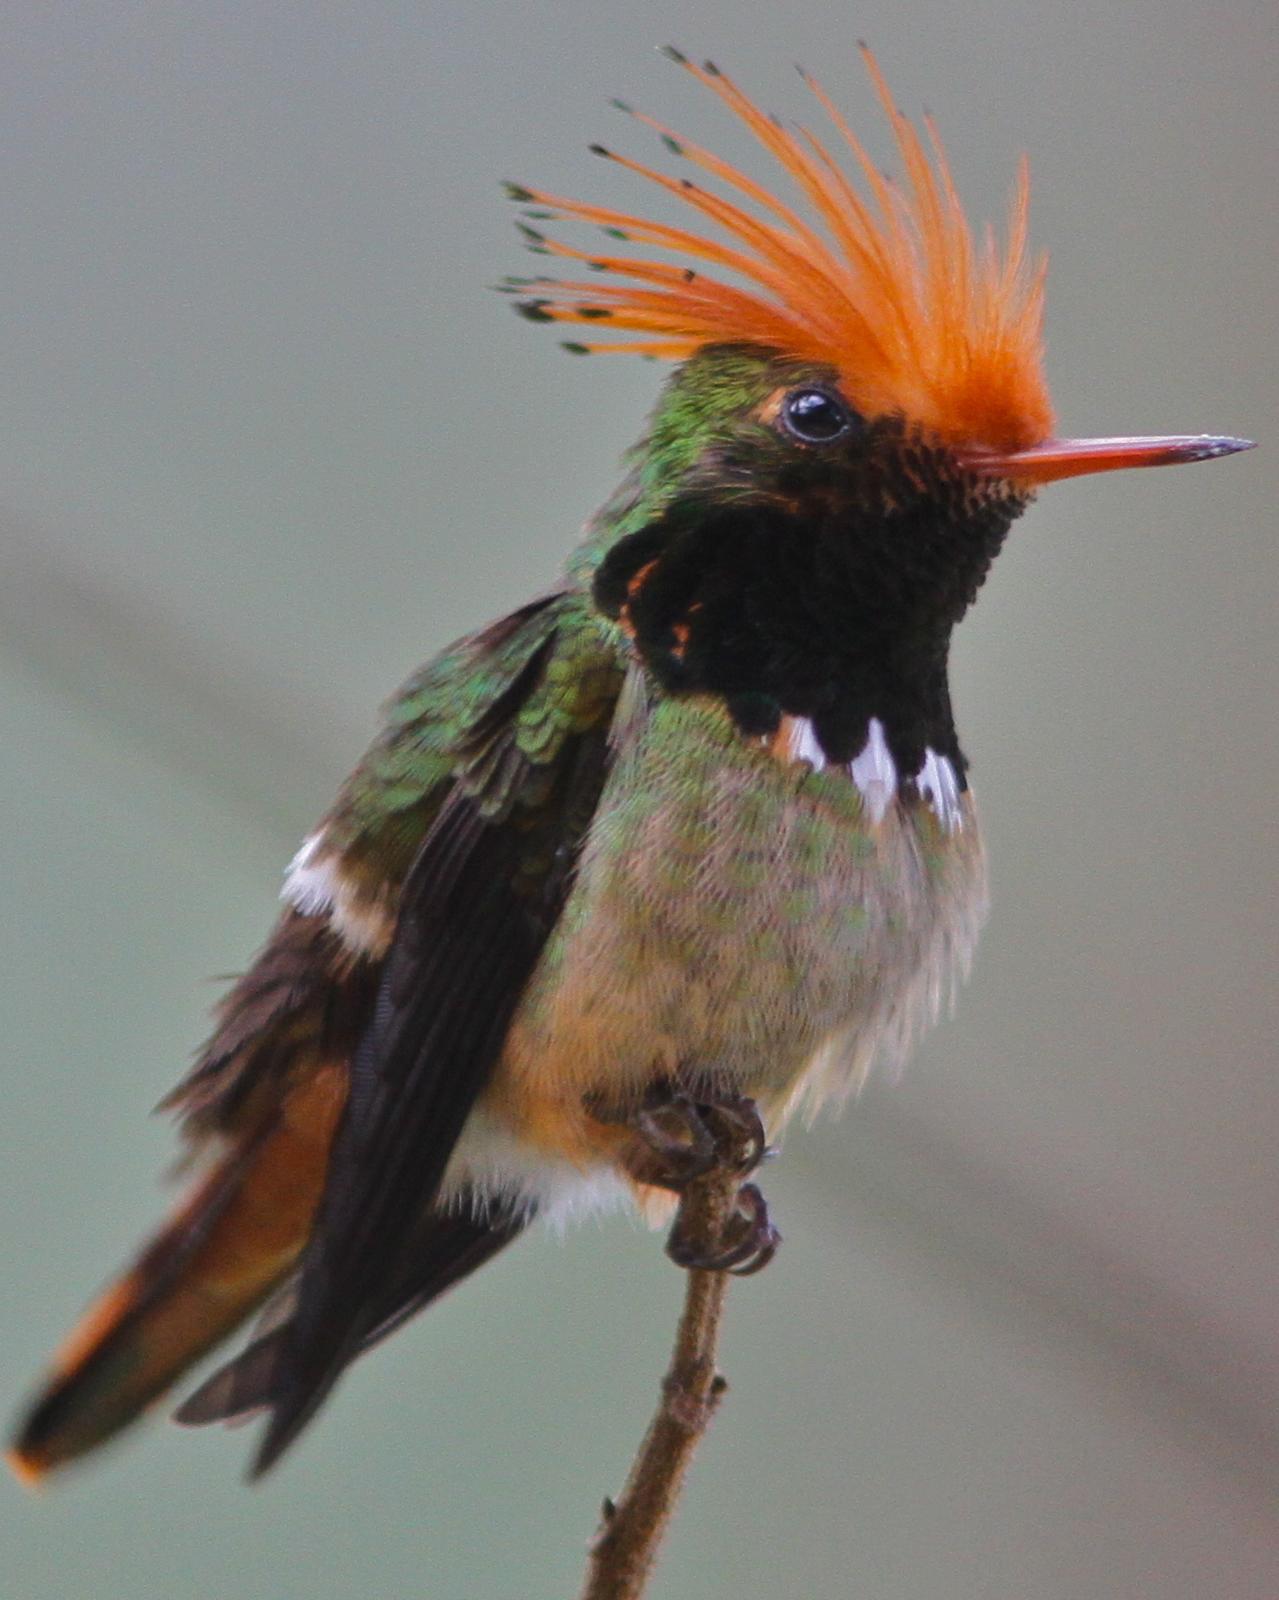 Rufous-crested Coquette Photo by Marcelo Padua